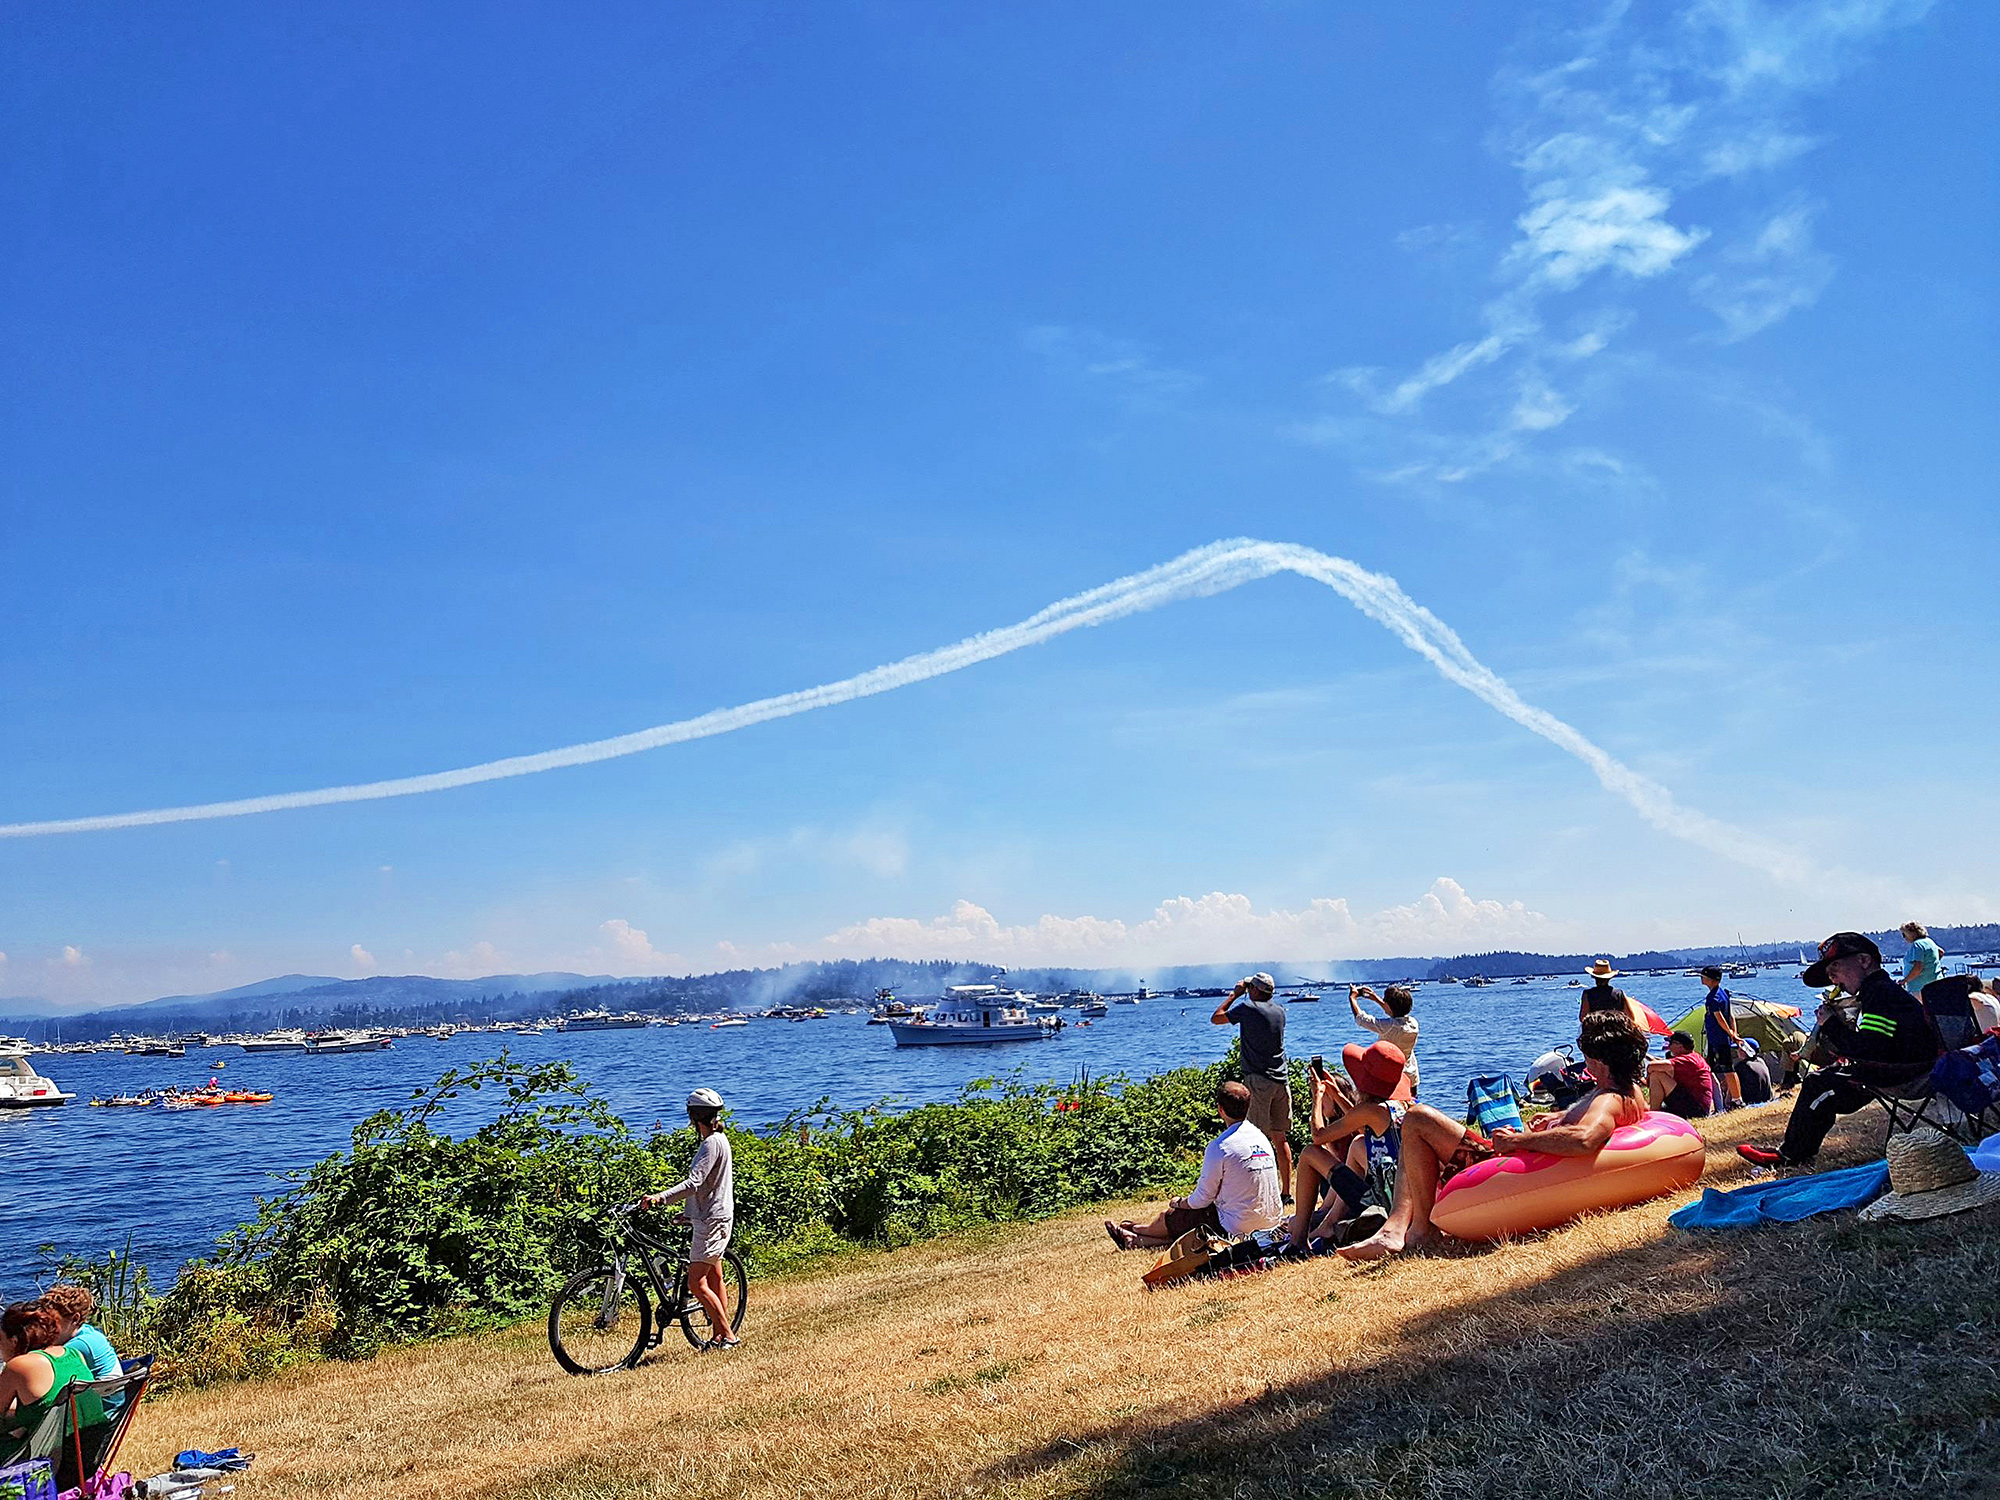 Seafair attendees at Lake Washington scan a blue sky filled with contrails for the Blue Angels